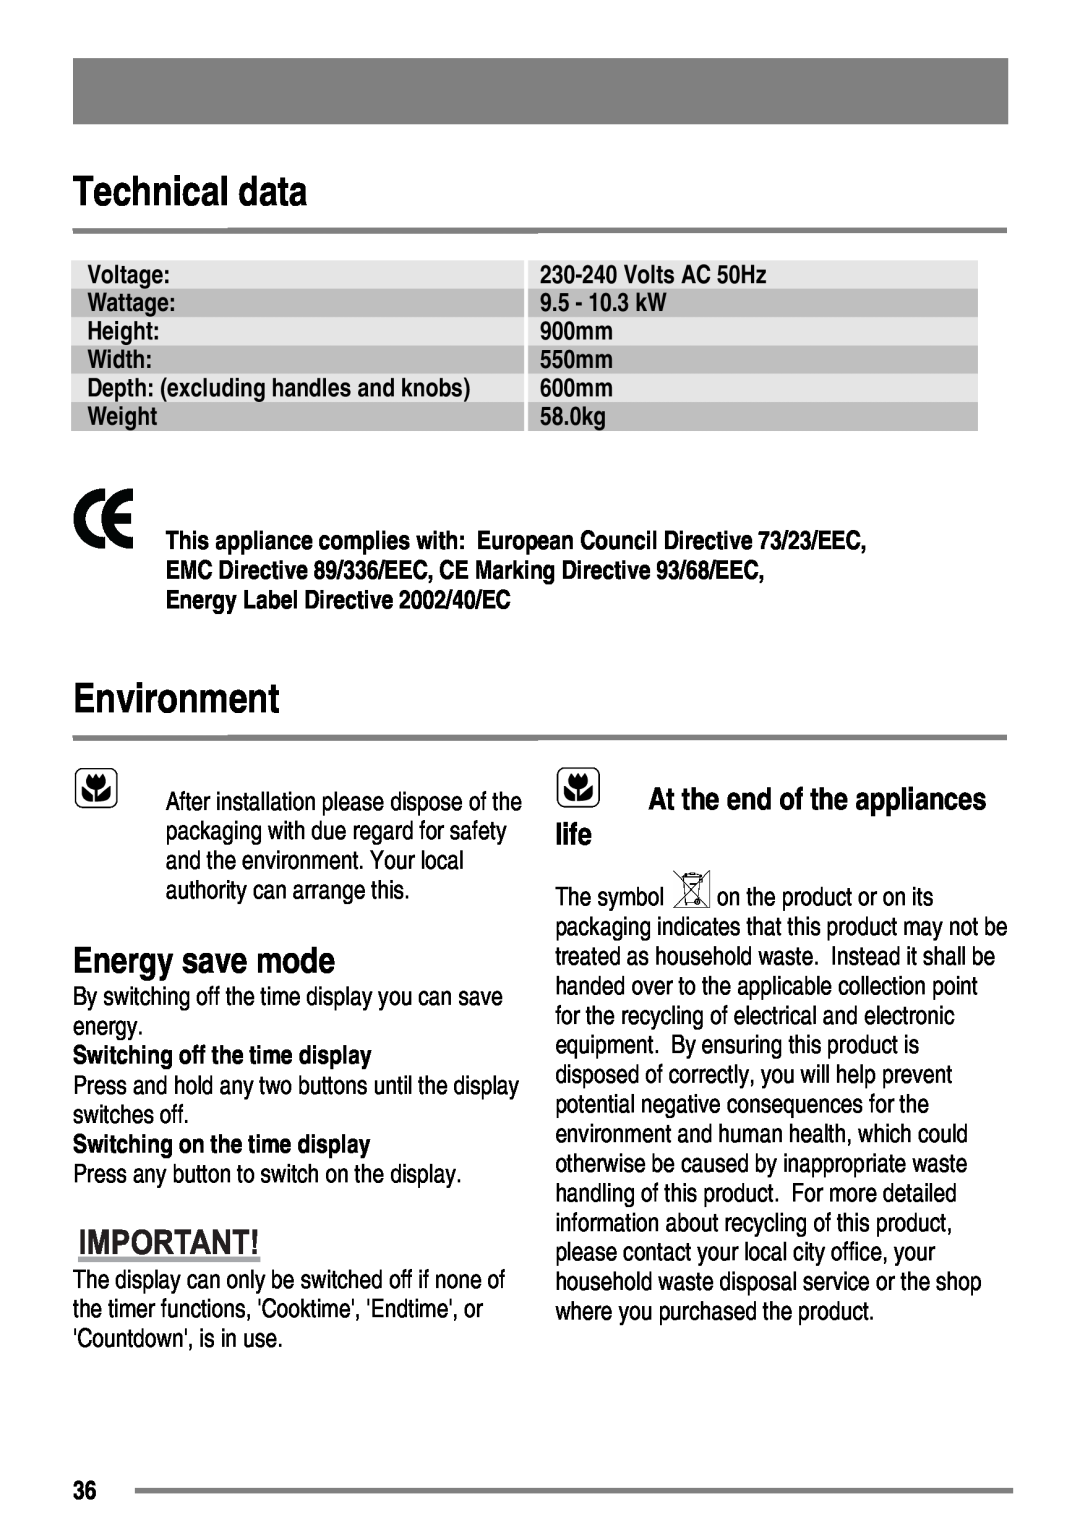 Zanussi ZKC5540 Technical data, Environment, Energy save mode, At the end of the appliances life, Voltage, Volts AC 50Hz 